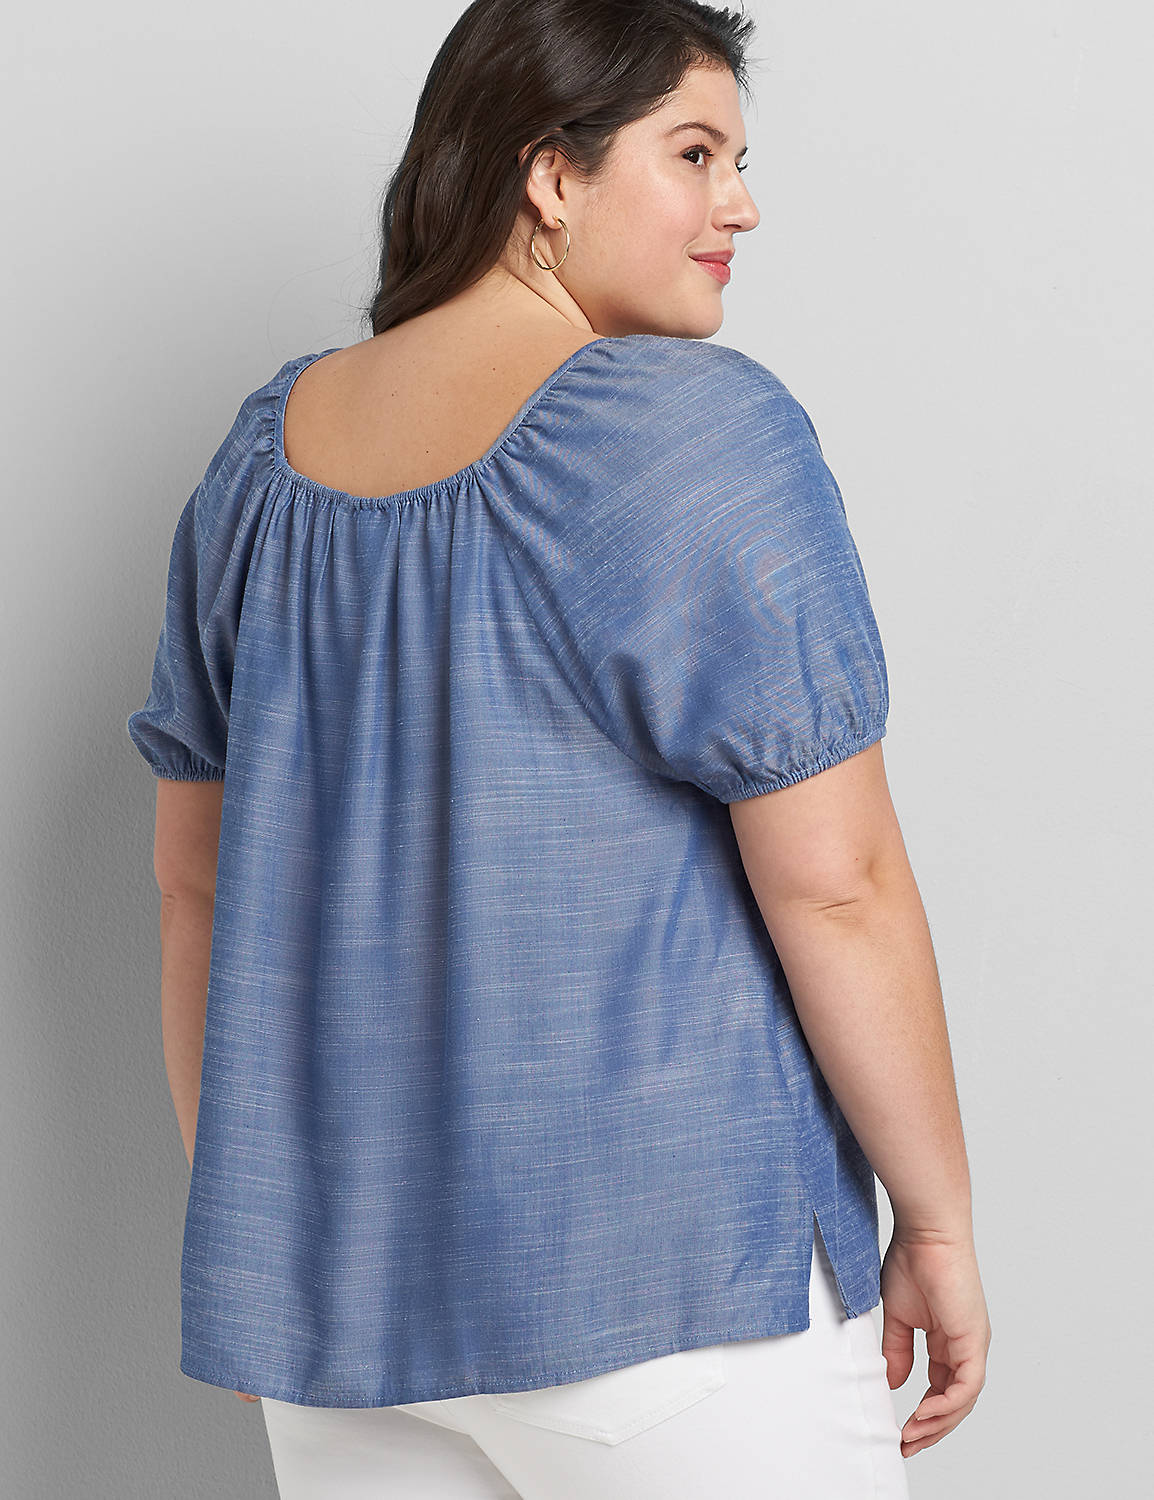 Short Puff Sleeve Square Vneck Chambray Top 1118472:Chambray:16 Product Image 2